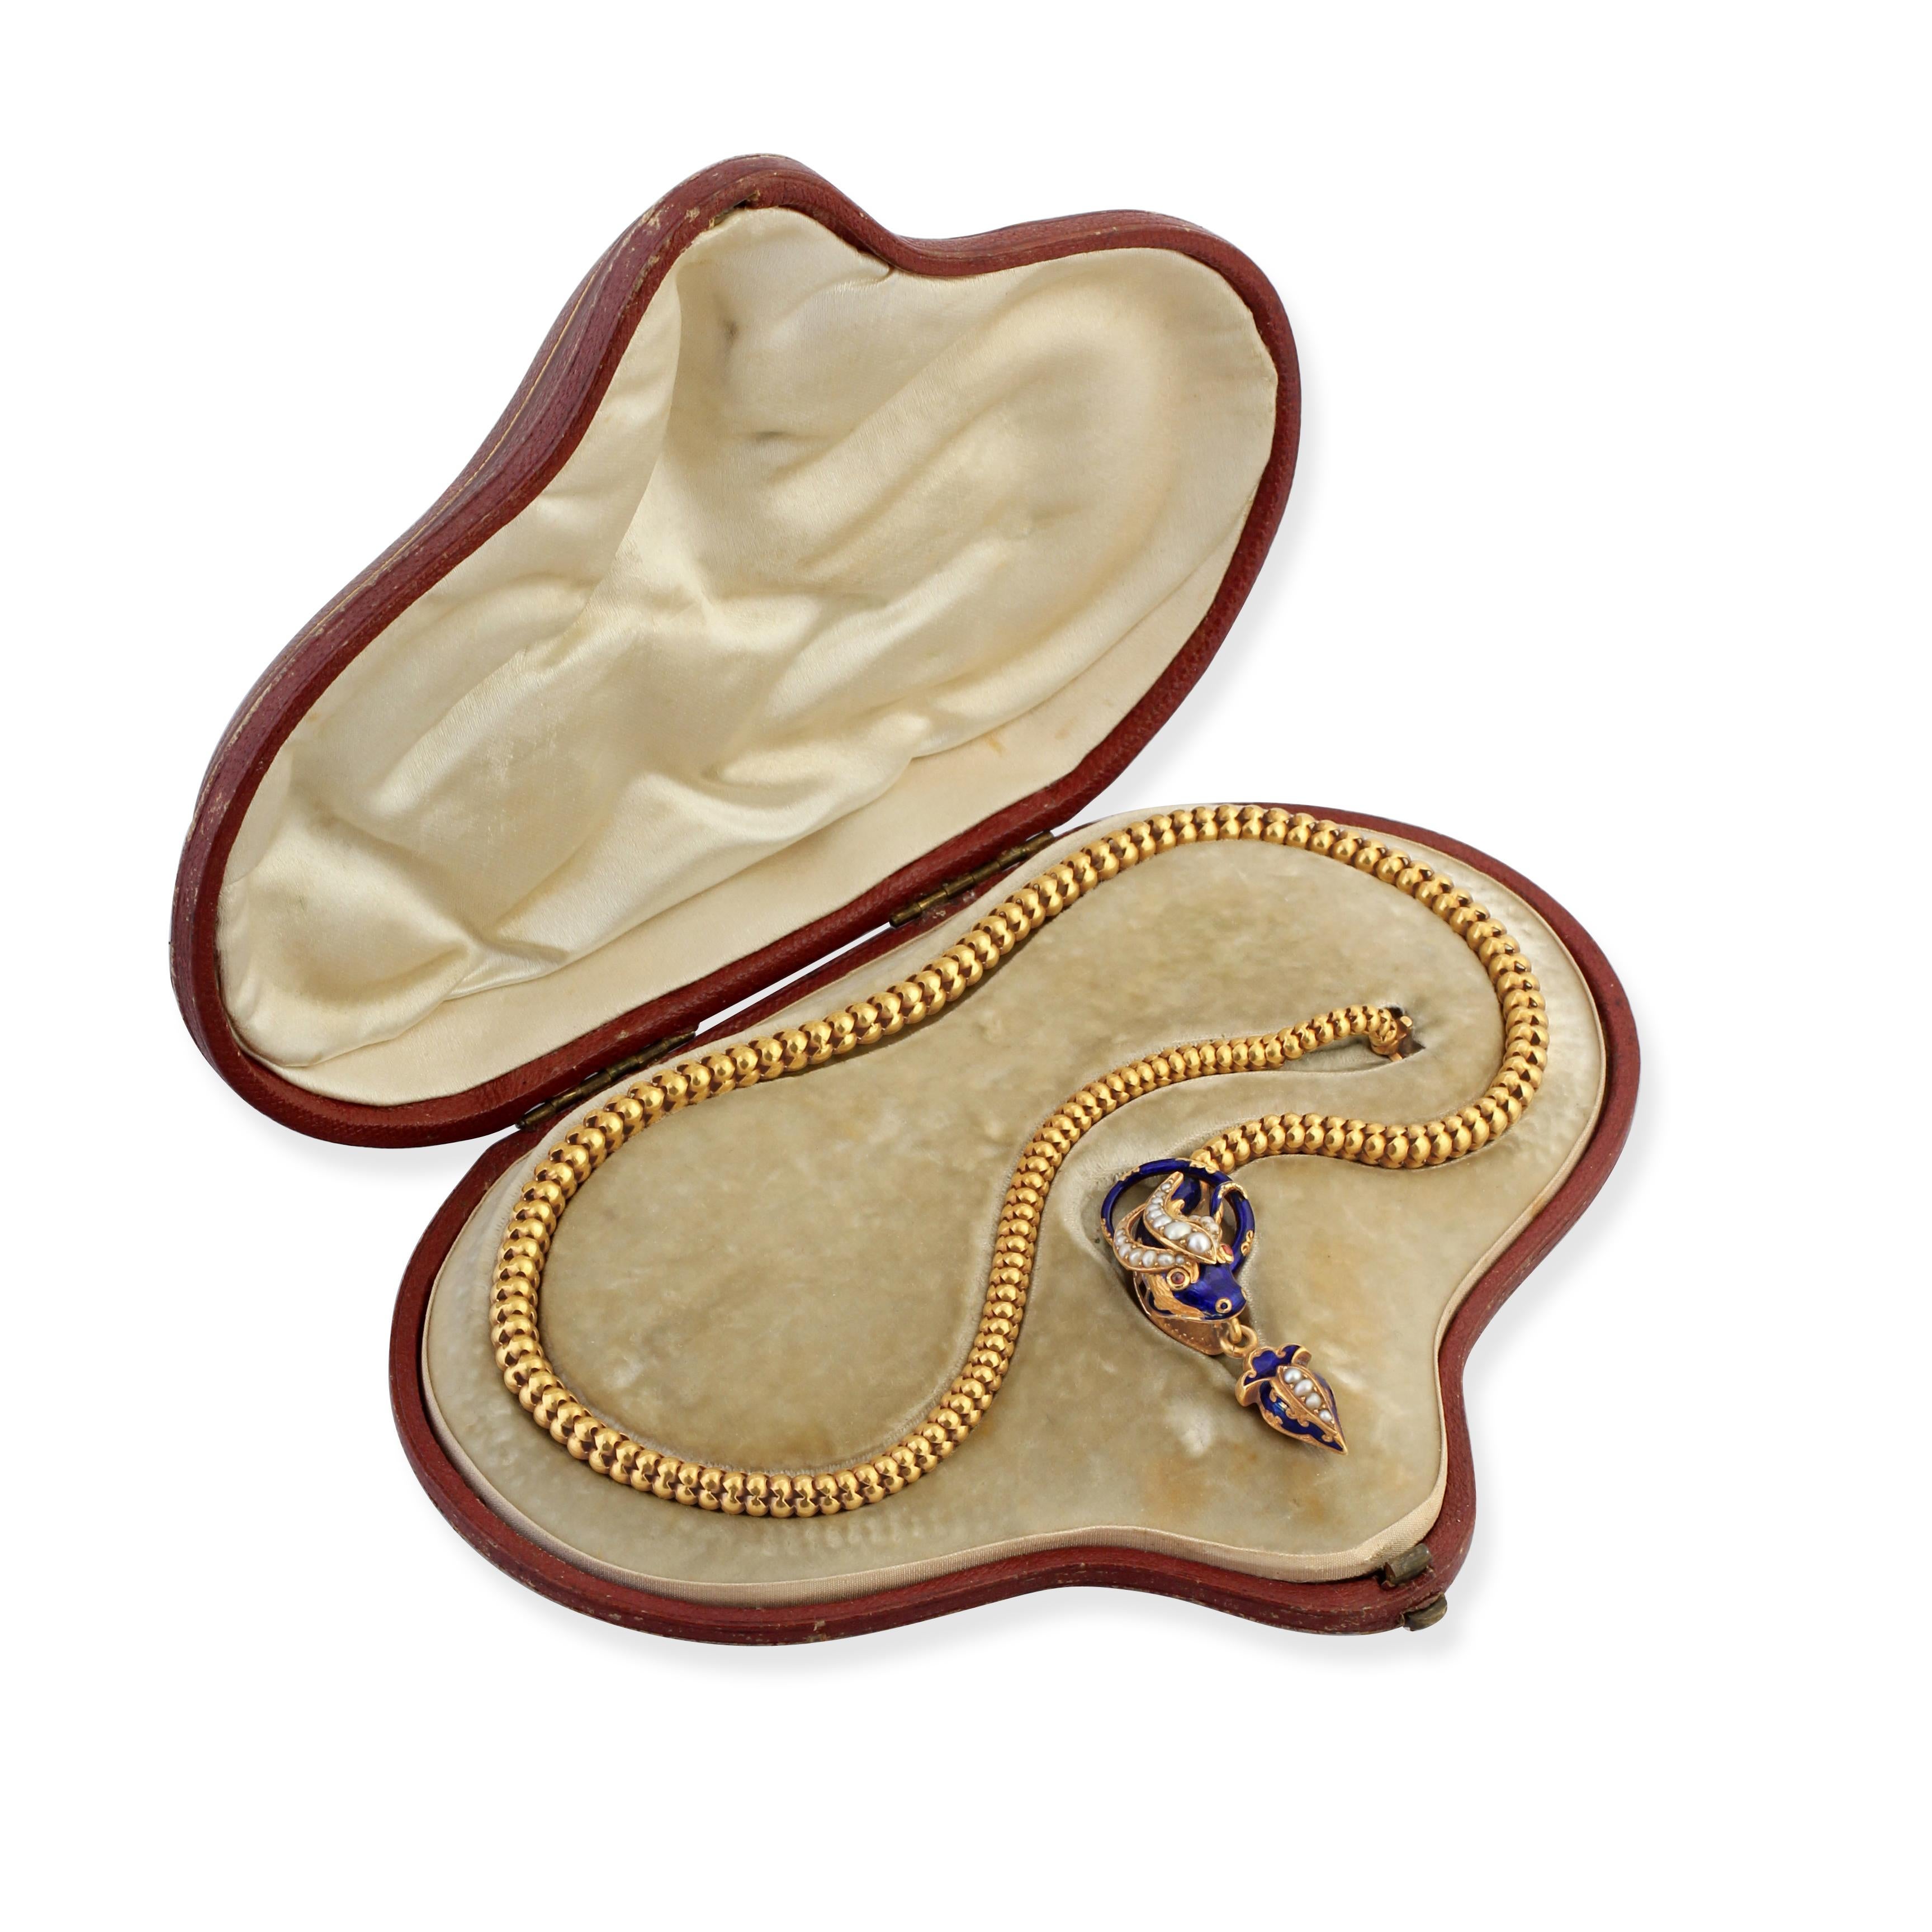 A mid-19th century gold and enamel snake necklace, formed of an articulated body with a head set with blue enamel, pearls and rubies.
